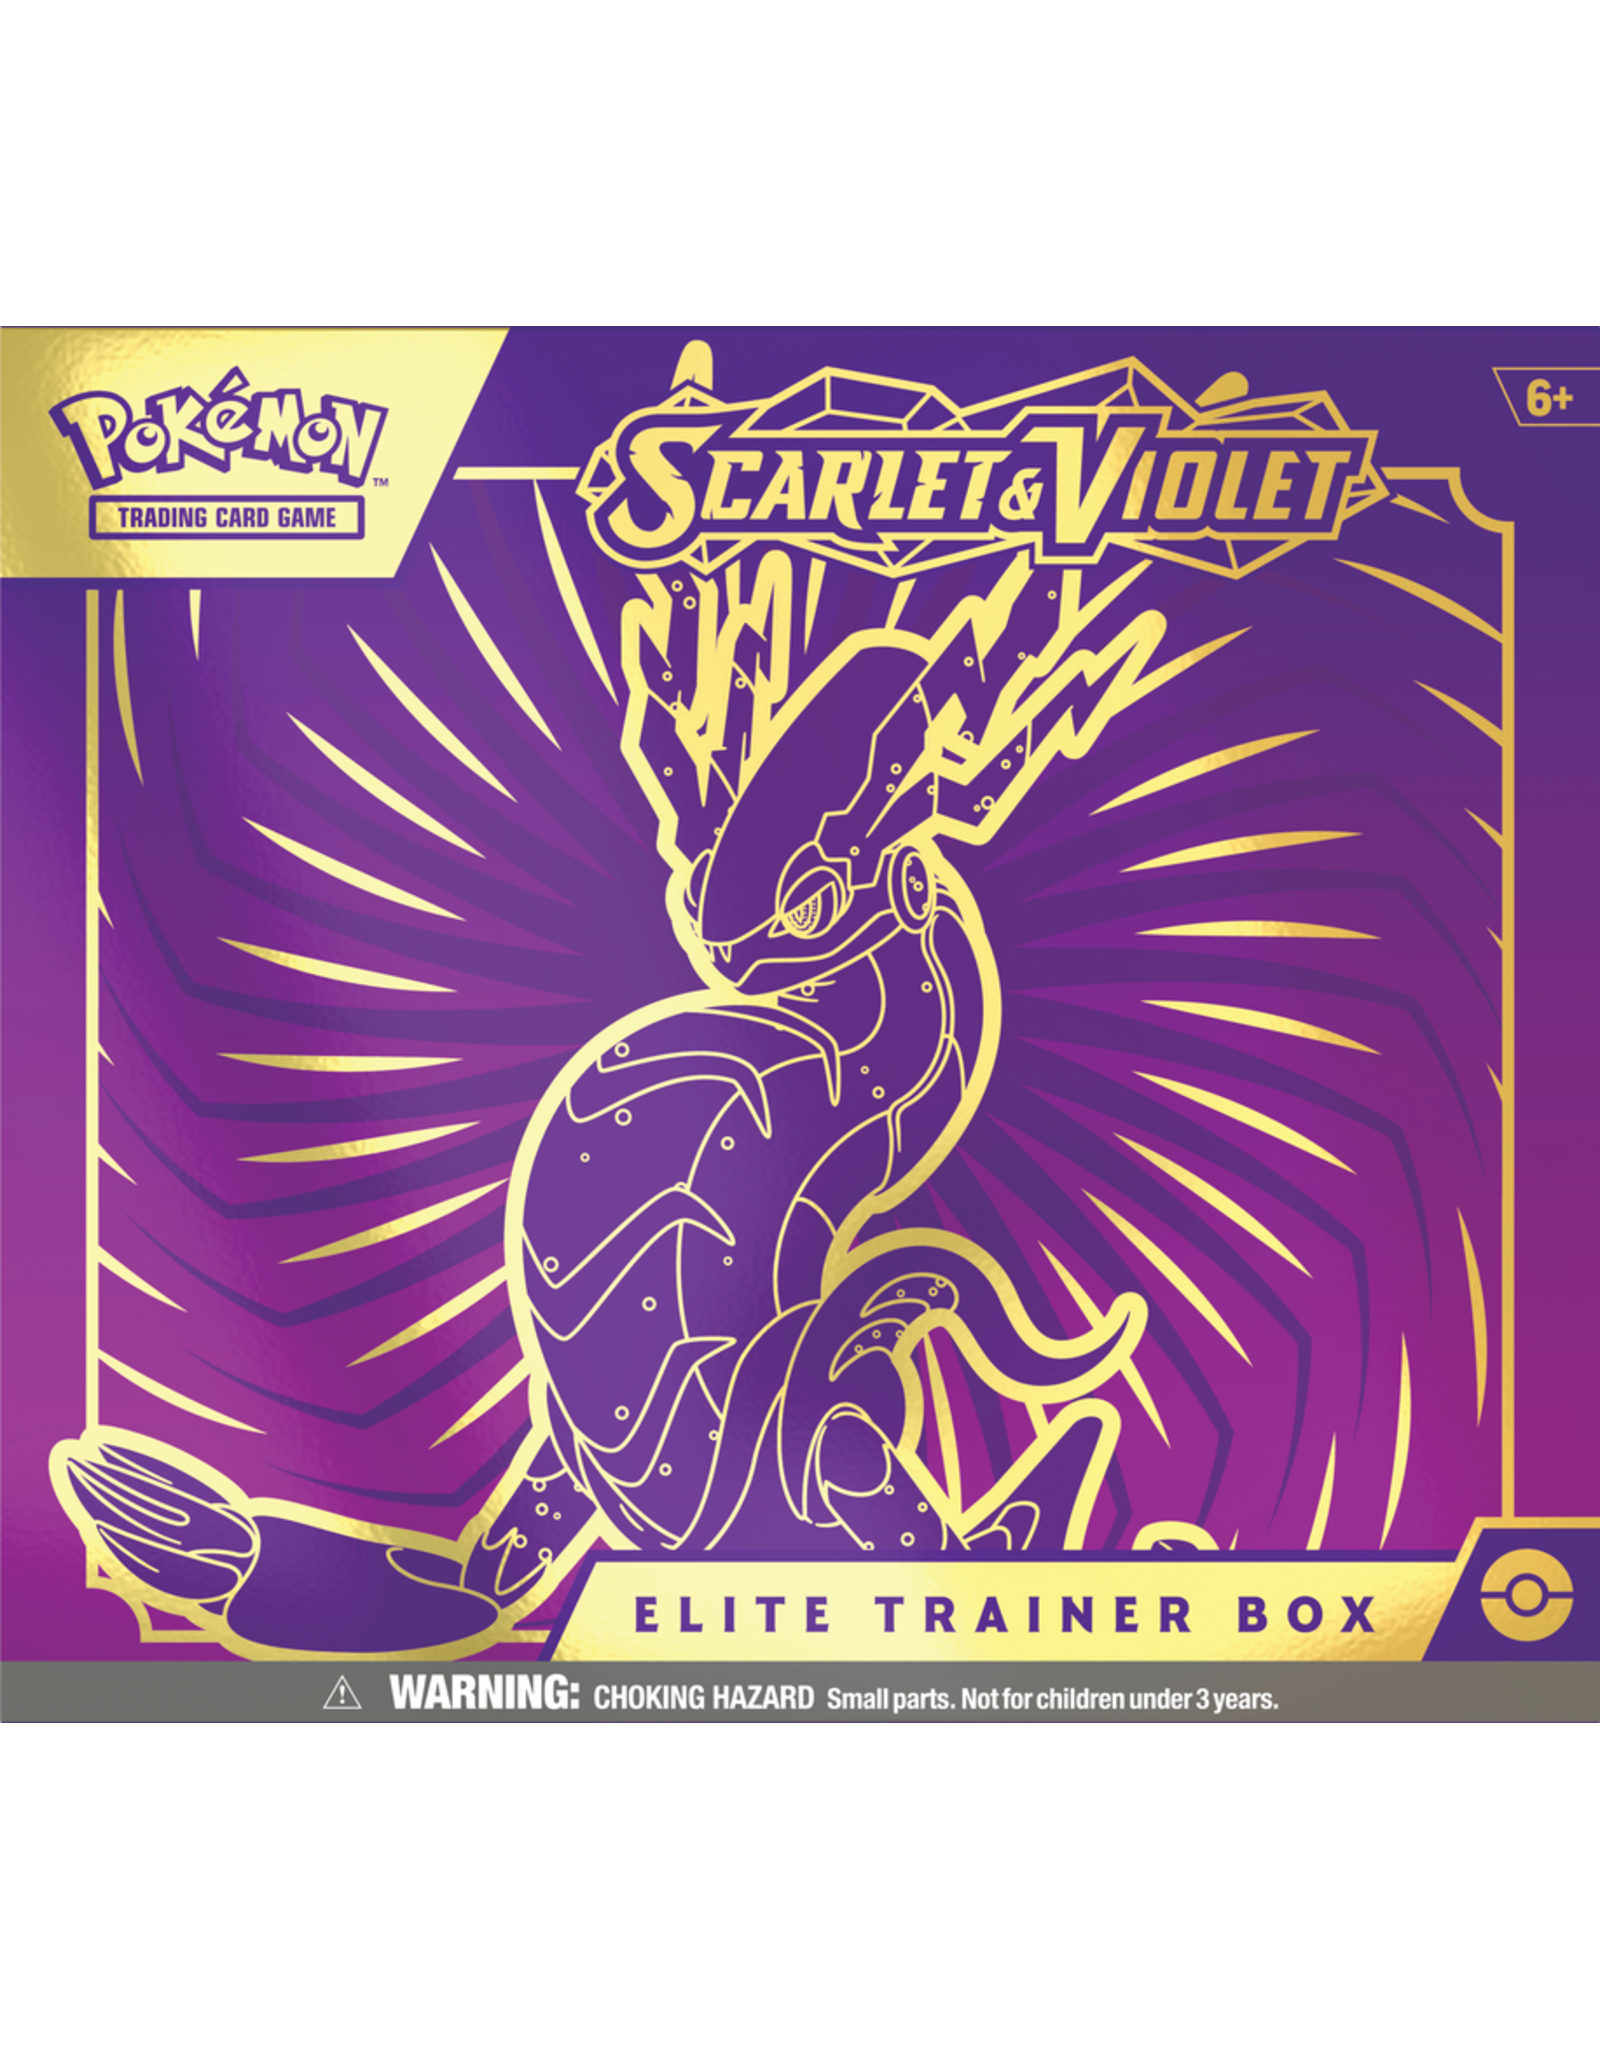 The Pokemon Company Pokémon Trading Card Game - Scarlet And Violet Elite Trainer Box